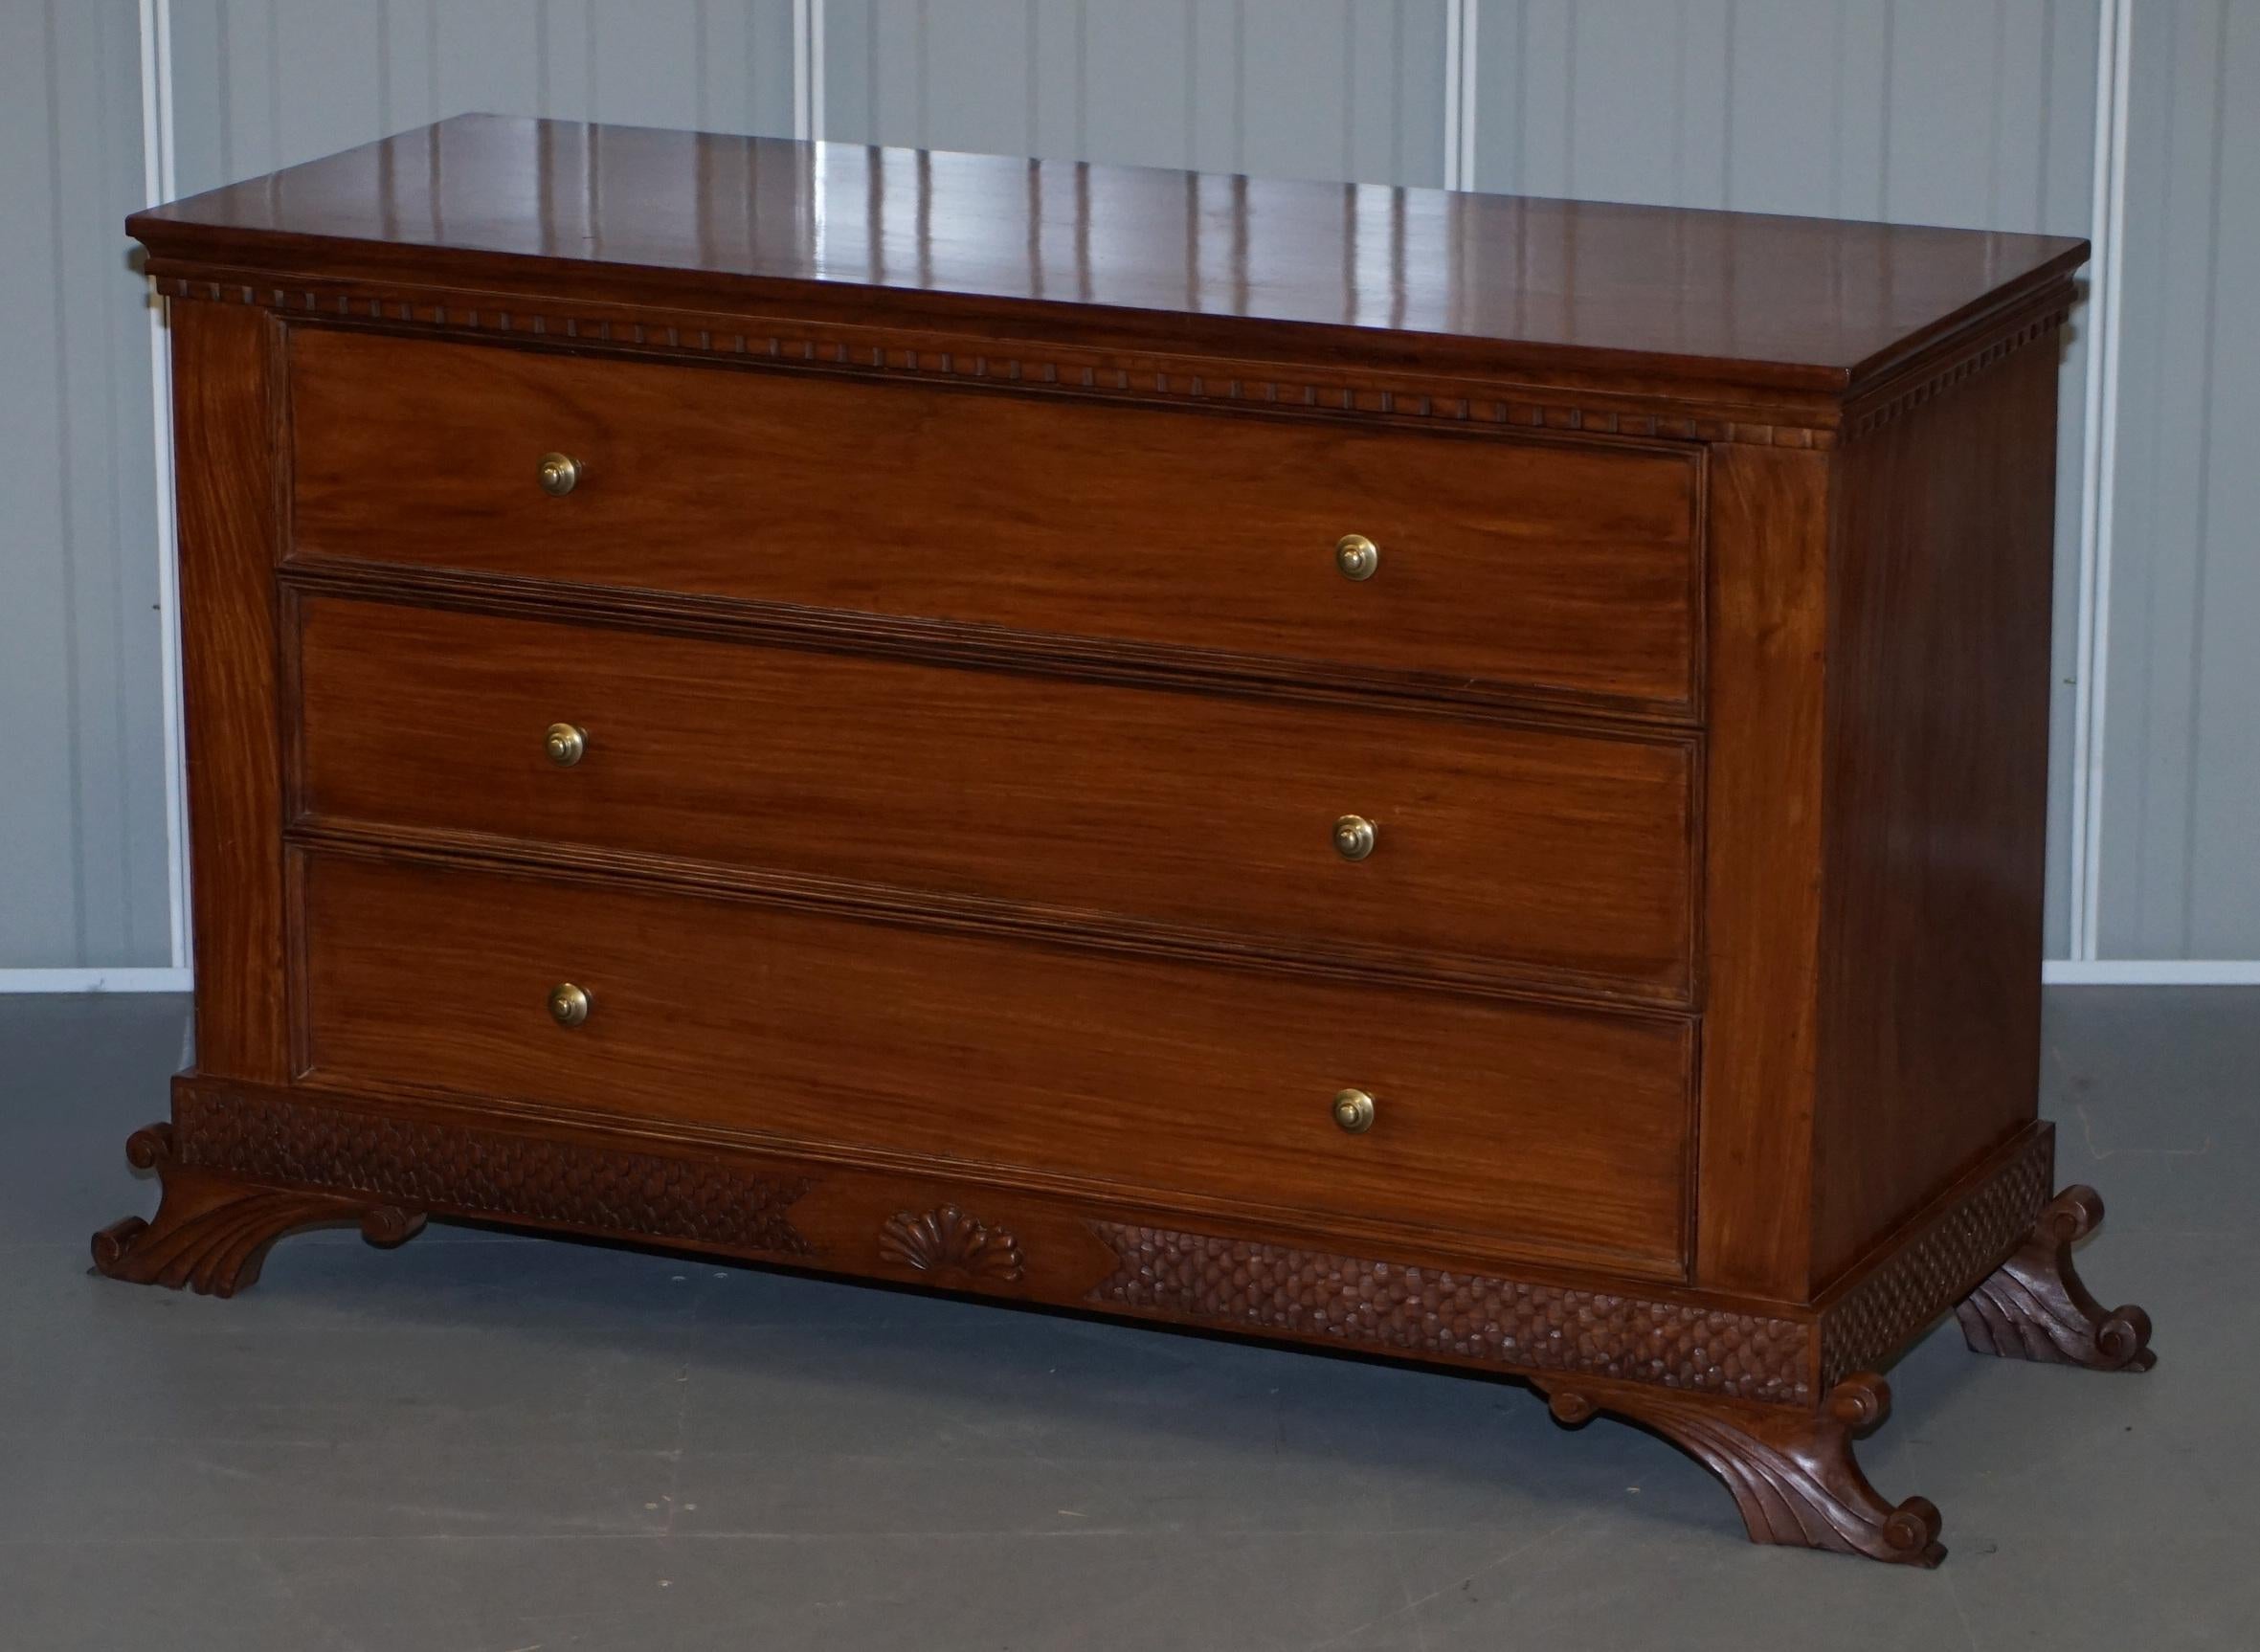 We are delighted to offer for sale this stunning suite of panelled mahogany chests of drawers

A very good looking well made and decorative suite. They can be used in a normal sitting room setting or as bedroom furniture. The side table sided